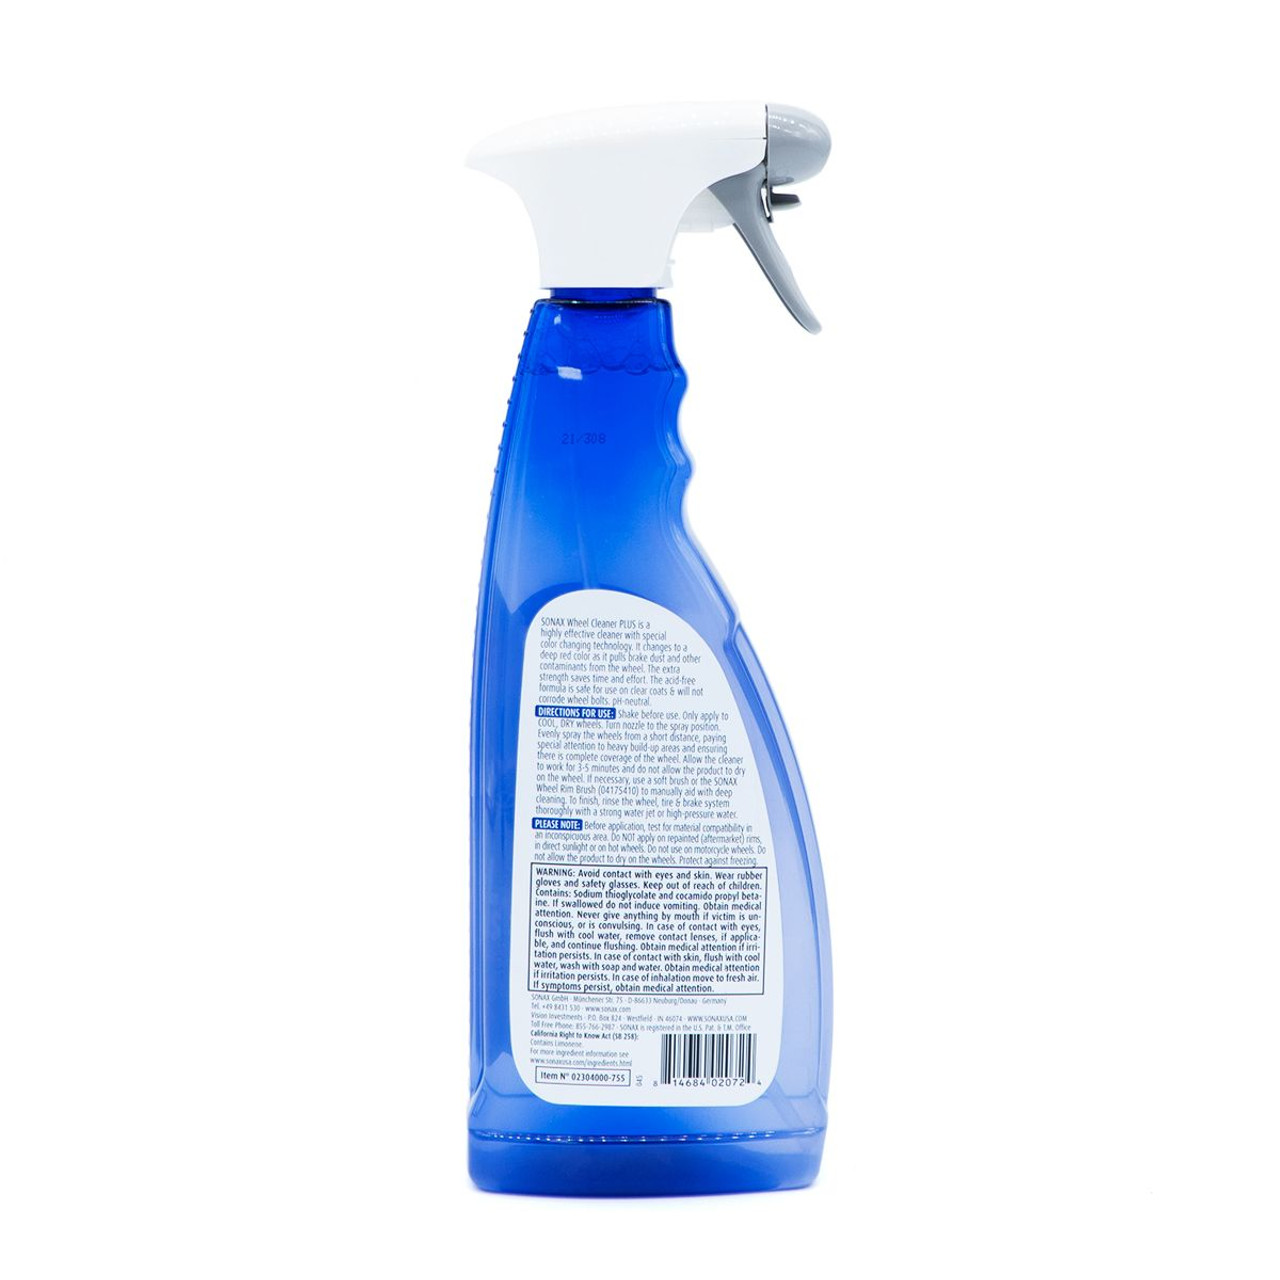 Sonax Tire Cleaner - 750 ml